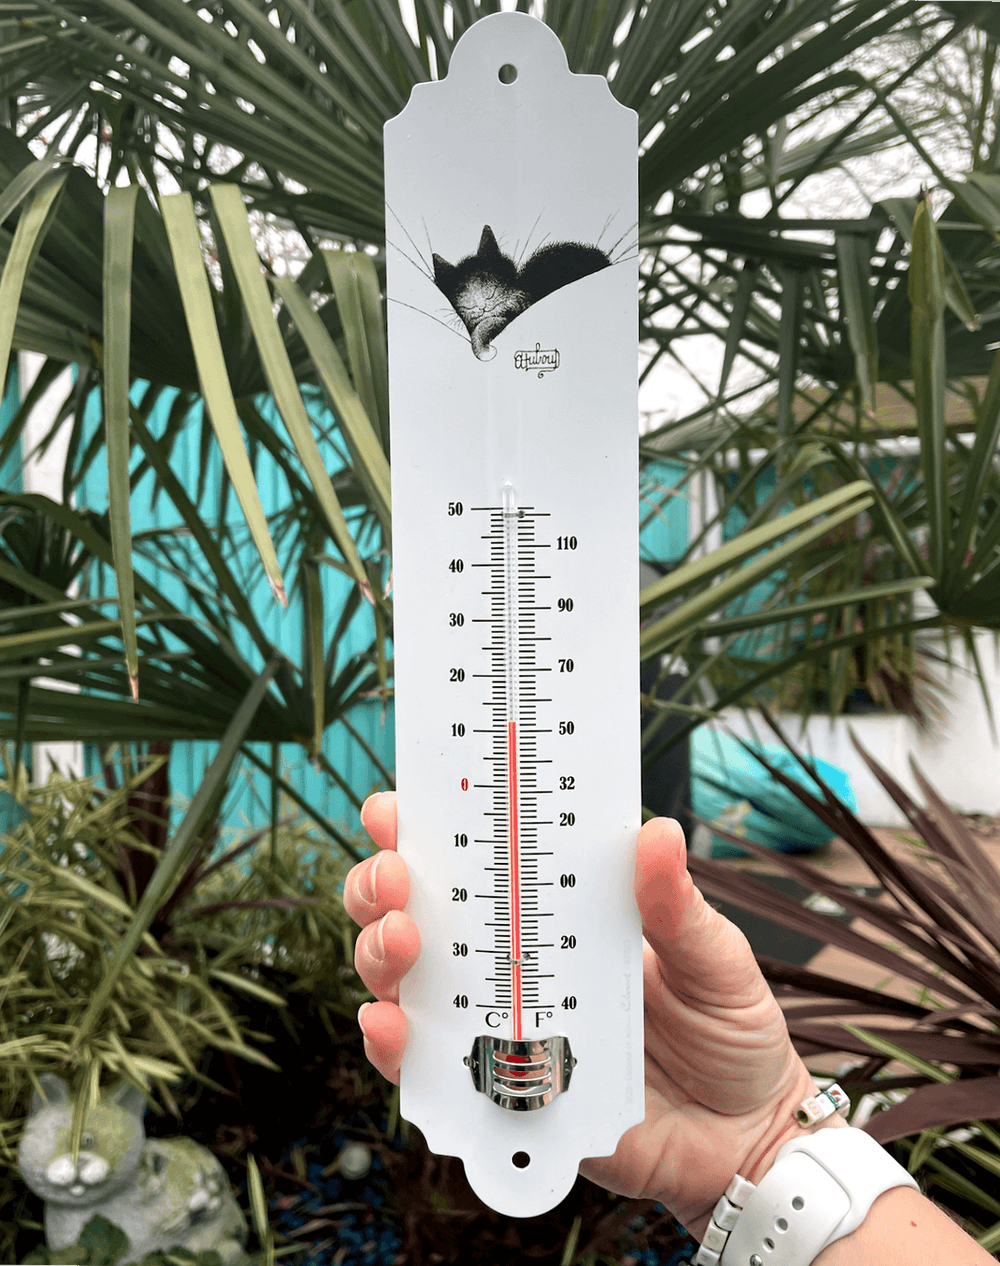 Dubout Cats - Big Sleep Garden Thermometer (Gros Dodo)